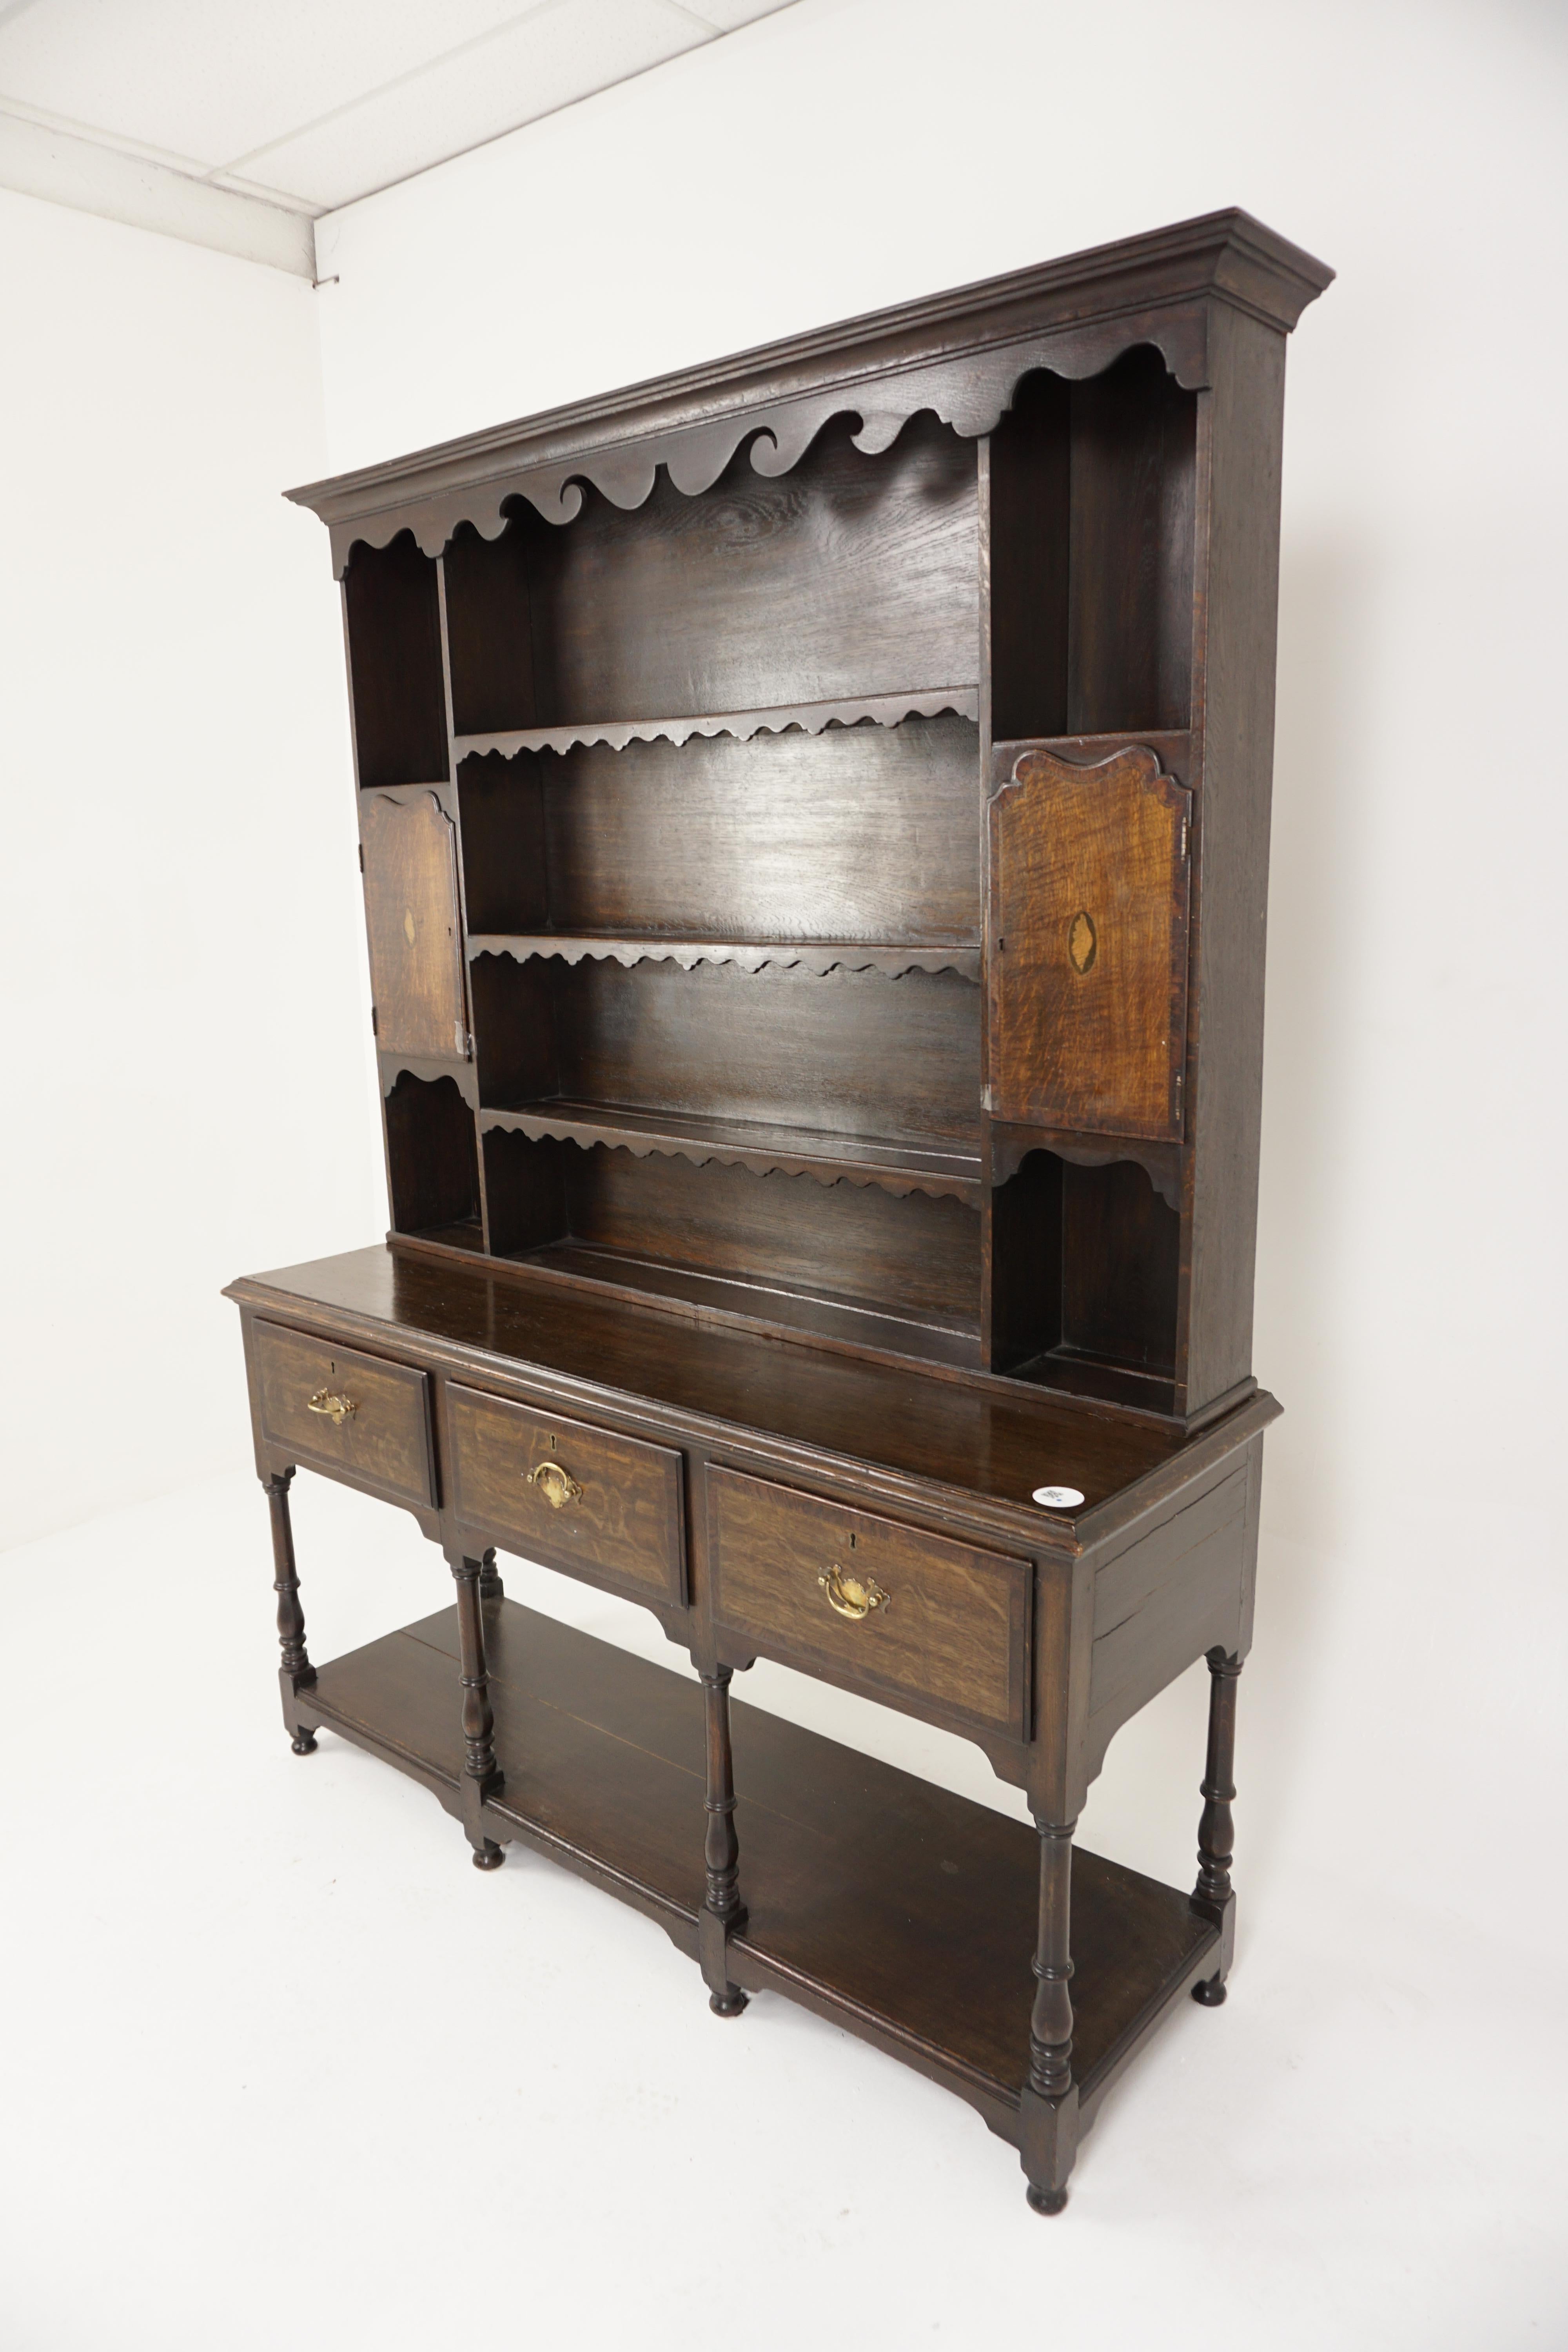 Antique Oak Inlaid Welsh Dresser, Sideboard, Buffet + Hutch, Scotland 1900, H944

Scotland 1900
Solid Oak
Original Finish
With moulded cornice on top
Wavy carved frieze below
With three shelves below with plate racks
Pair of shaped inlaid